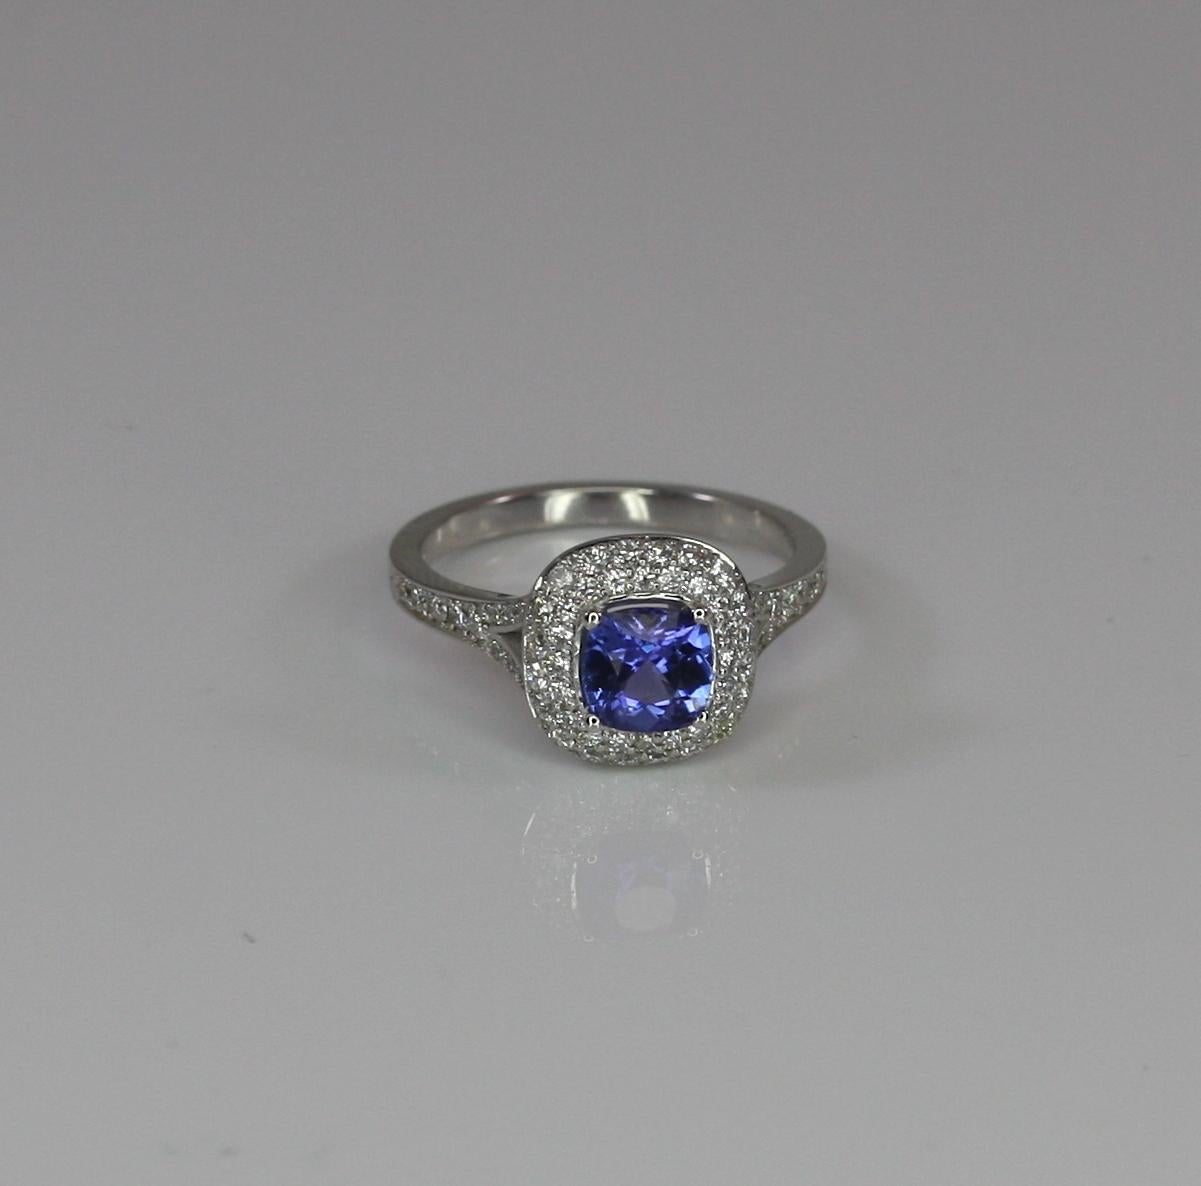 This S.Georgios designer White Gold 18 Karat ring features an exquisite 0.89 Carat cushion cut Tanzanite accompanied by Brilliant-cut White Diamonds a total weight of 0.60 Carat. This classic and elegant gorgeous ring is for everyday wear and is